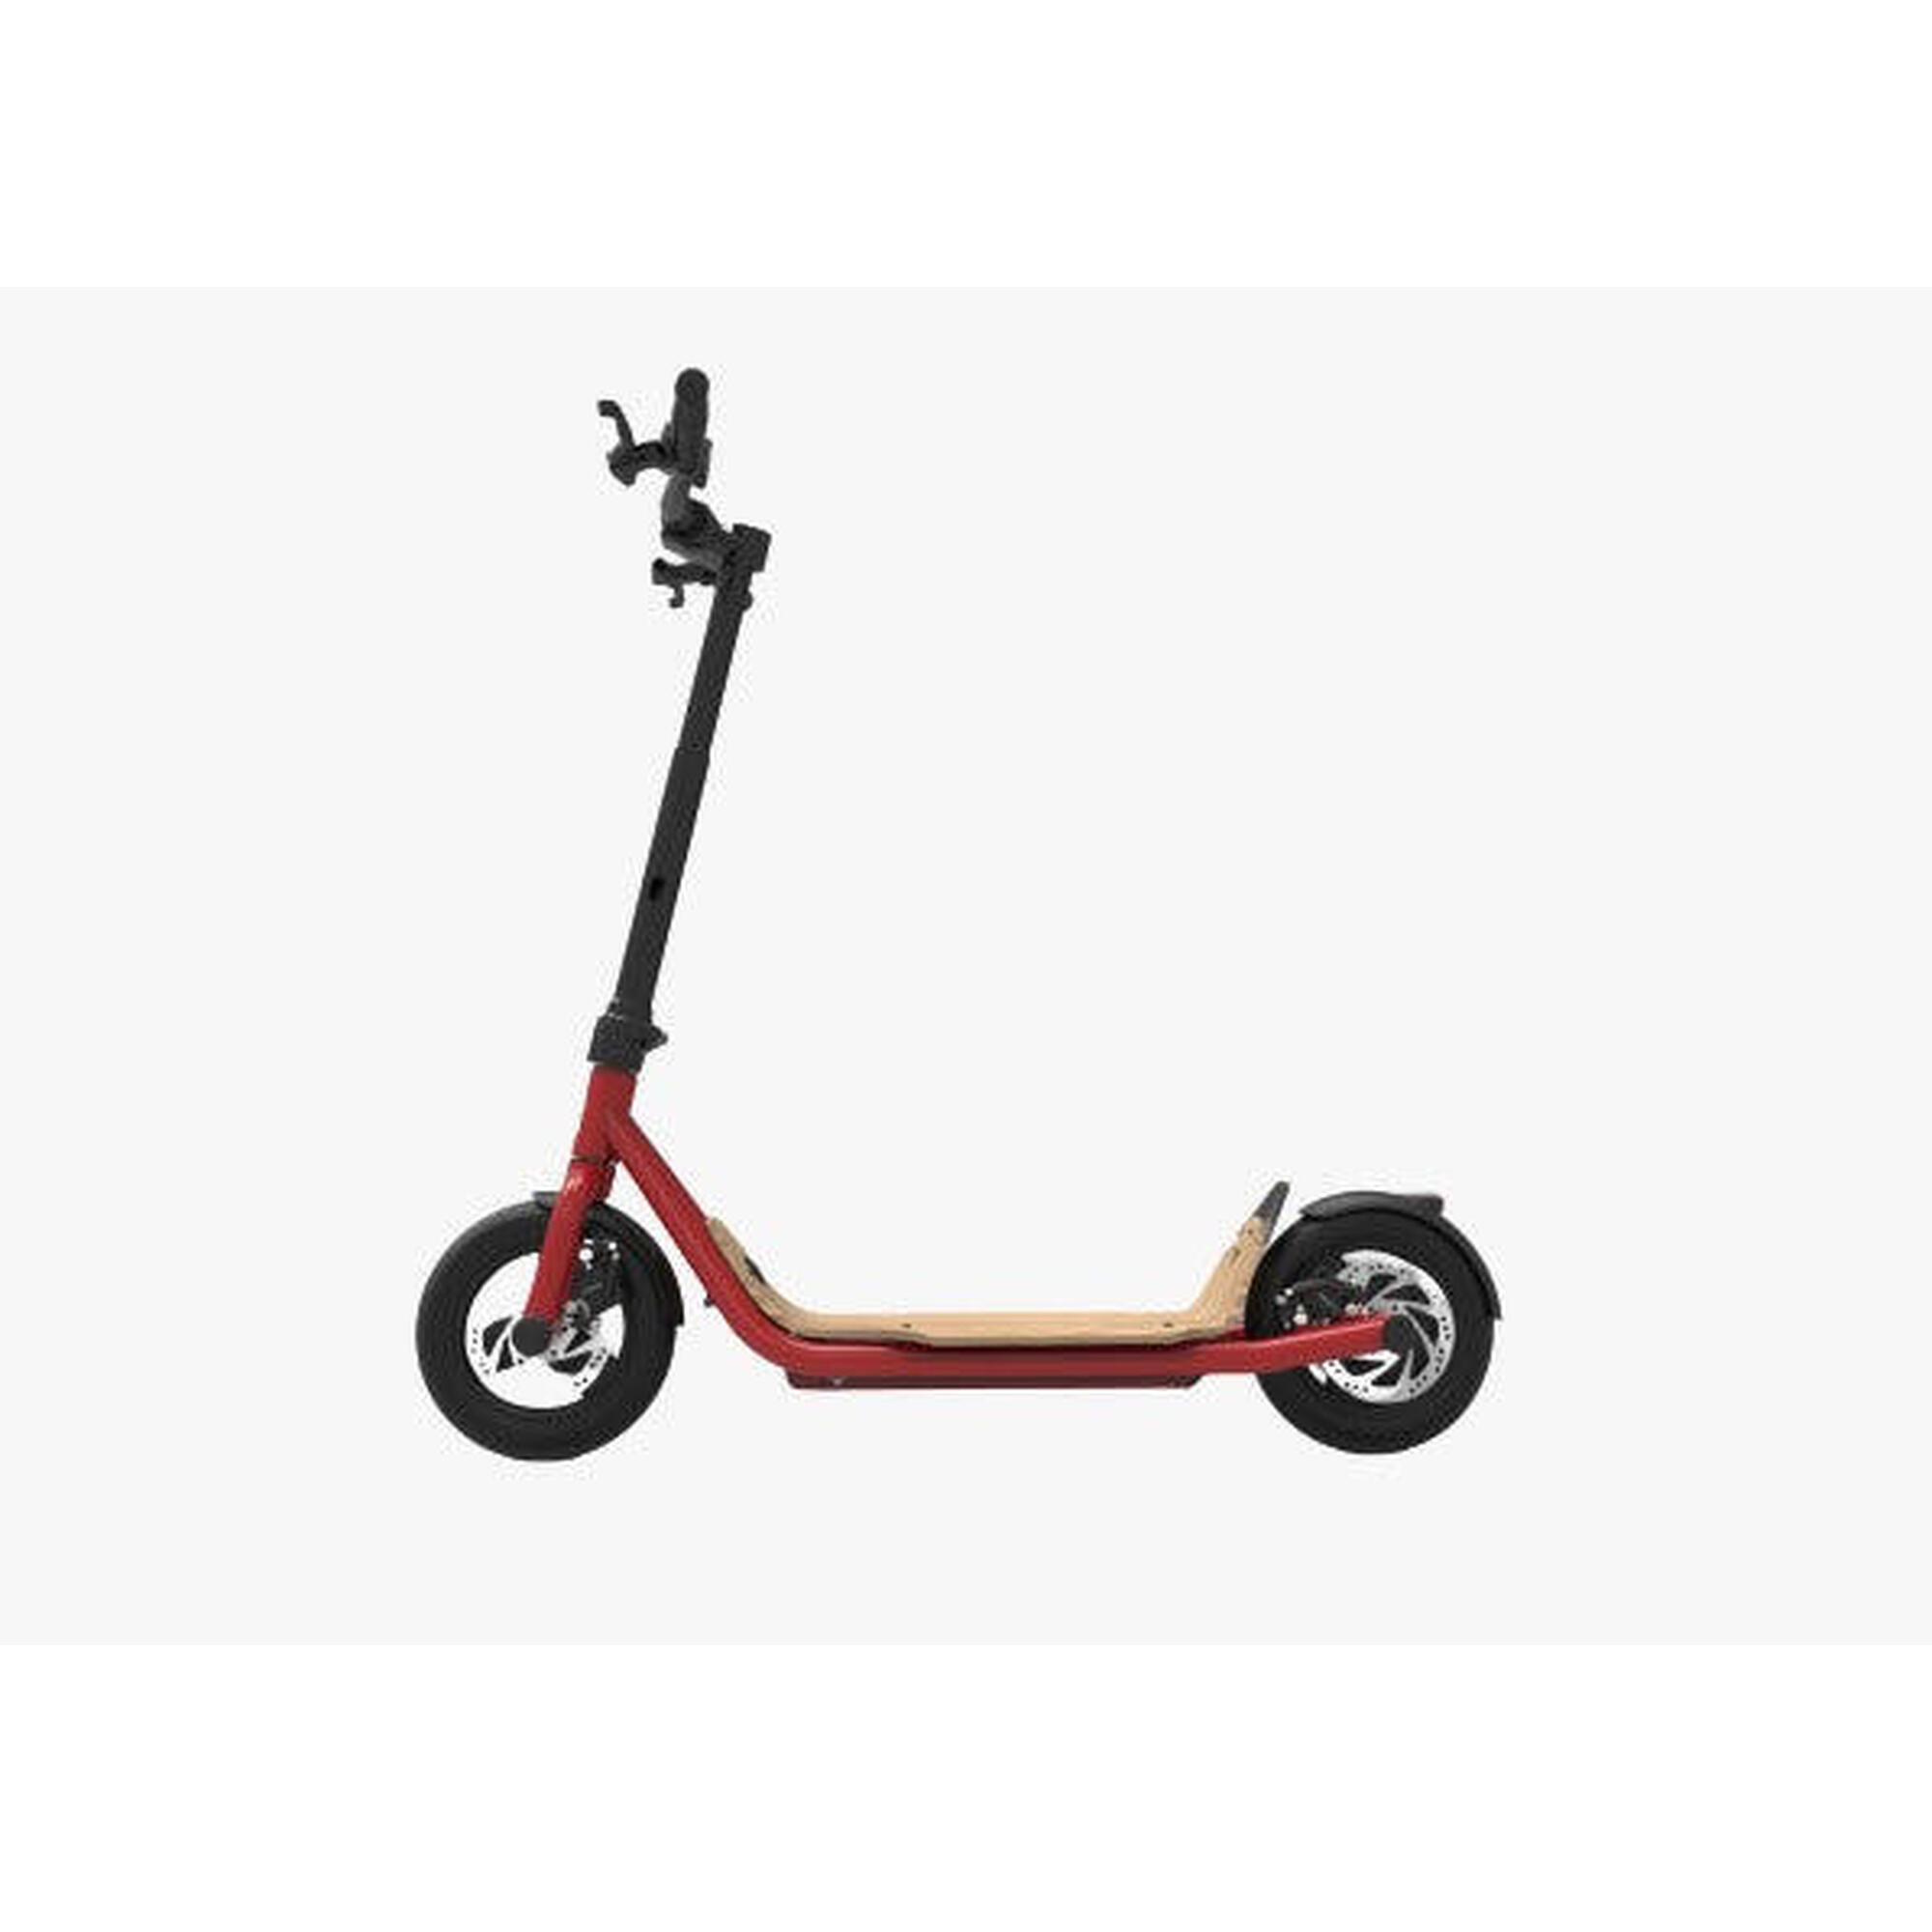 8TEV B10 Proxi Electric Scooter Red 1/4